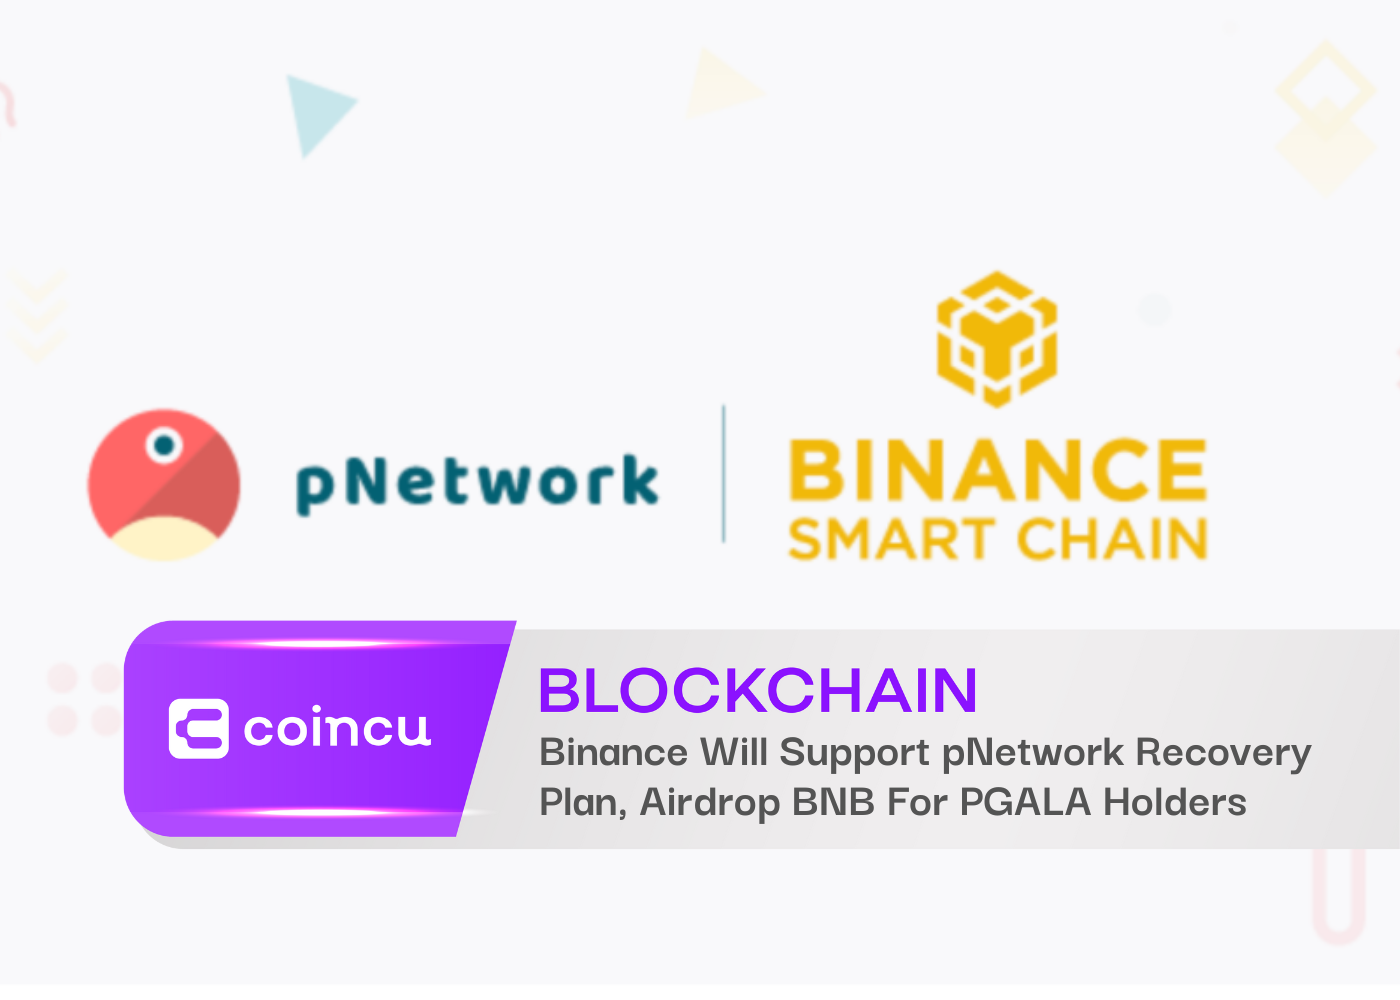 Binance Will Support pNetwork Recovery Plan, Airdrop BNB For PGALA Holders